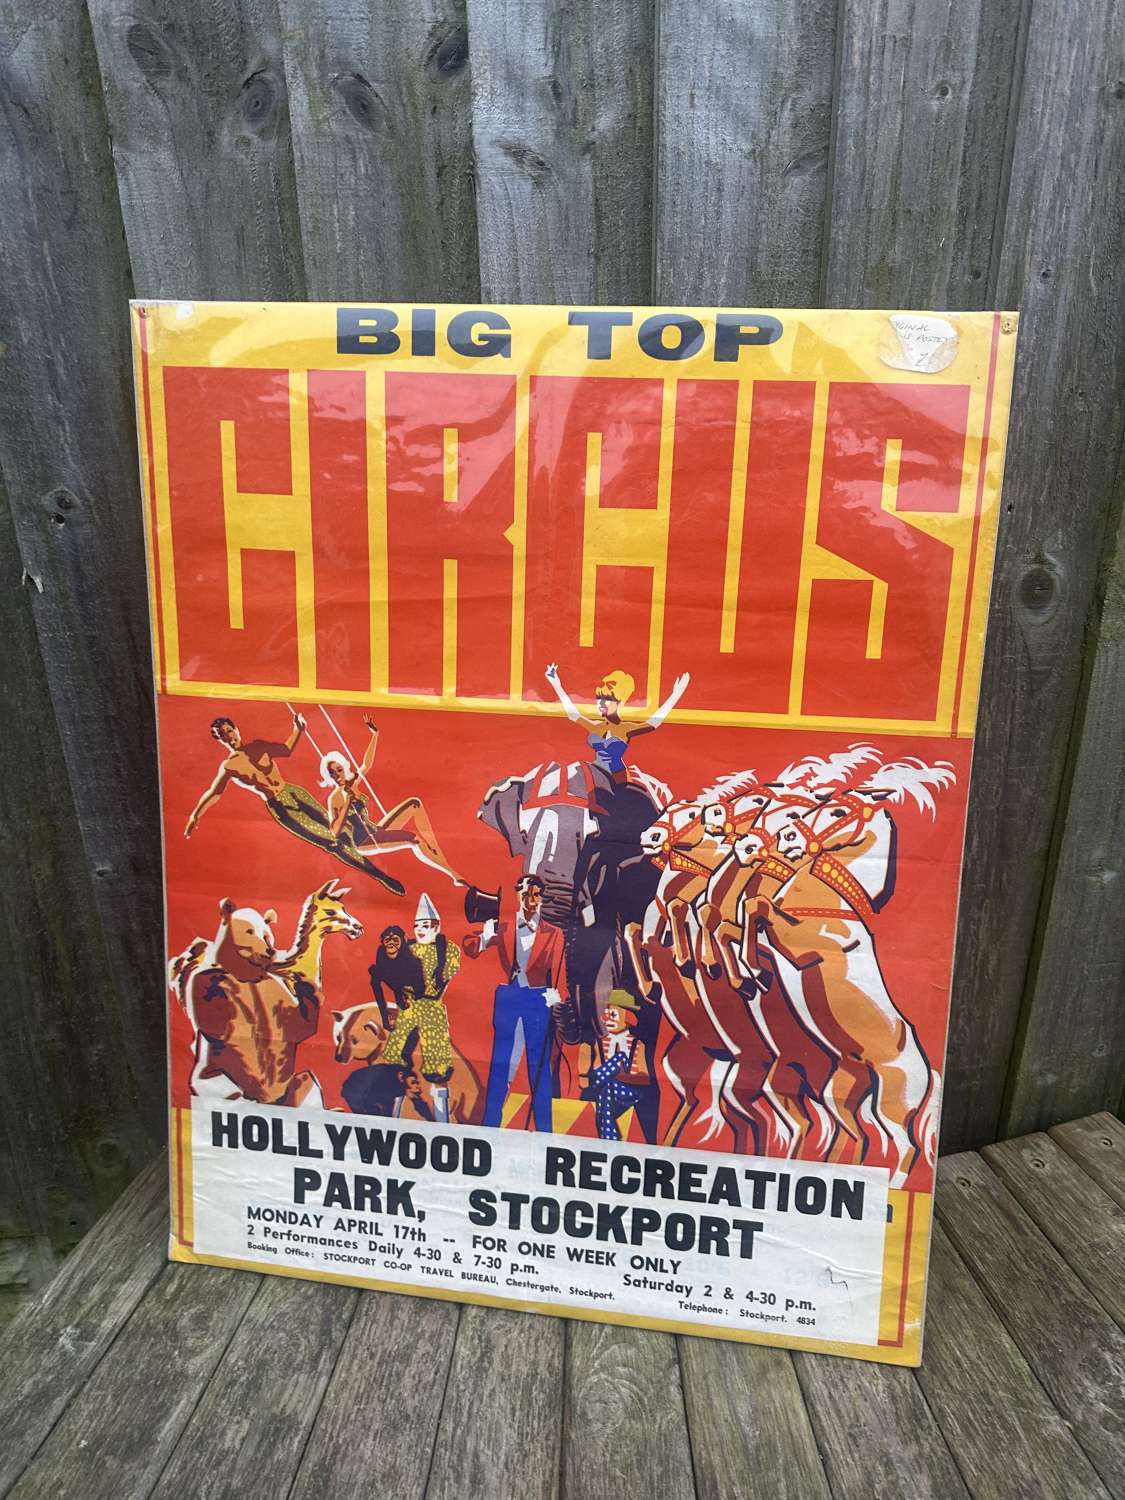 Lovely circus advertising poster